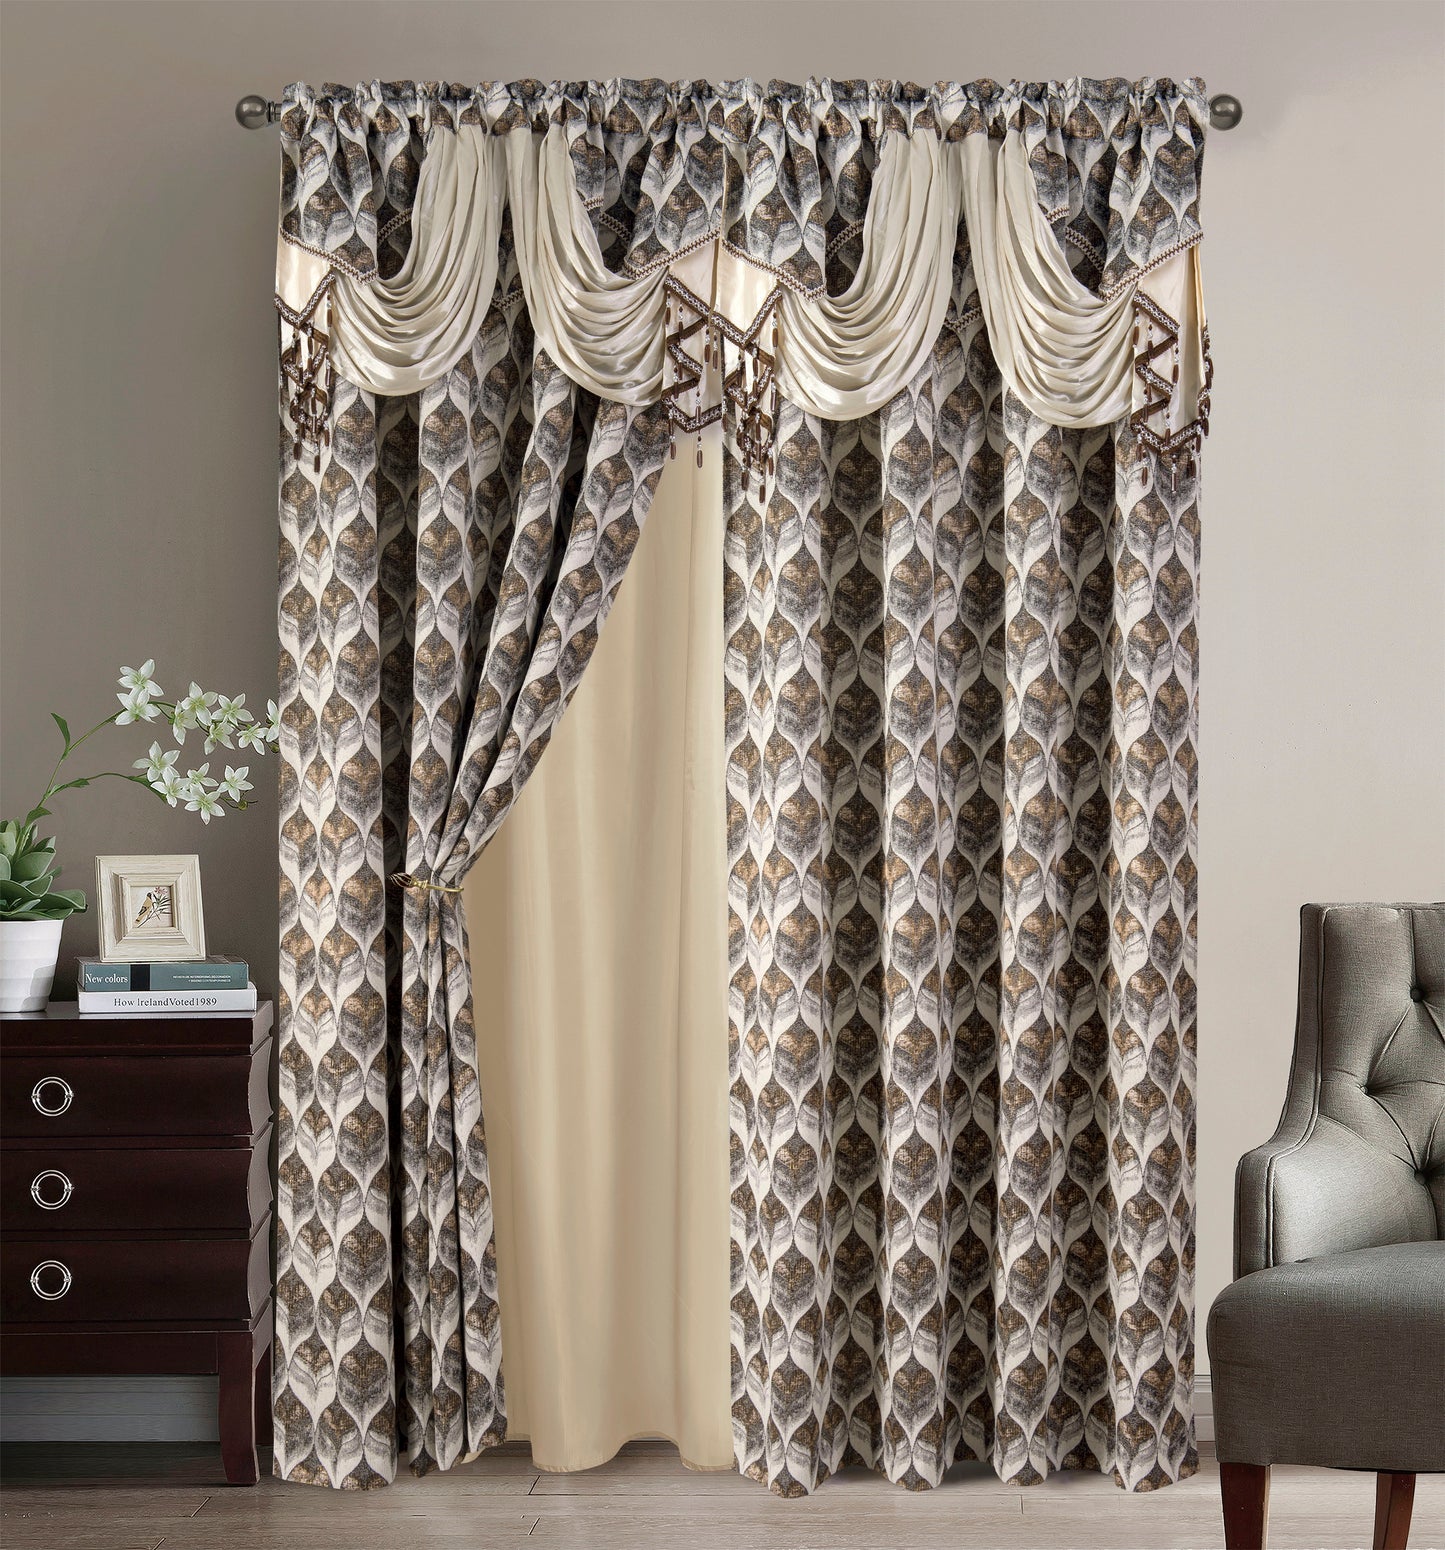 2PC CURTAIN SET W/ ATTACHED VALANCE & BACKING - Gloria